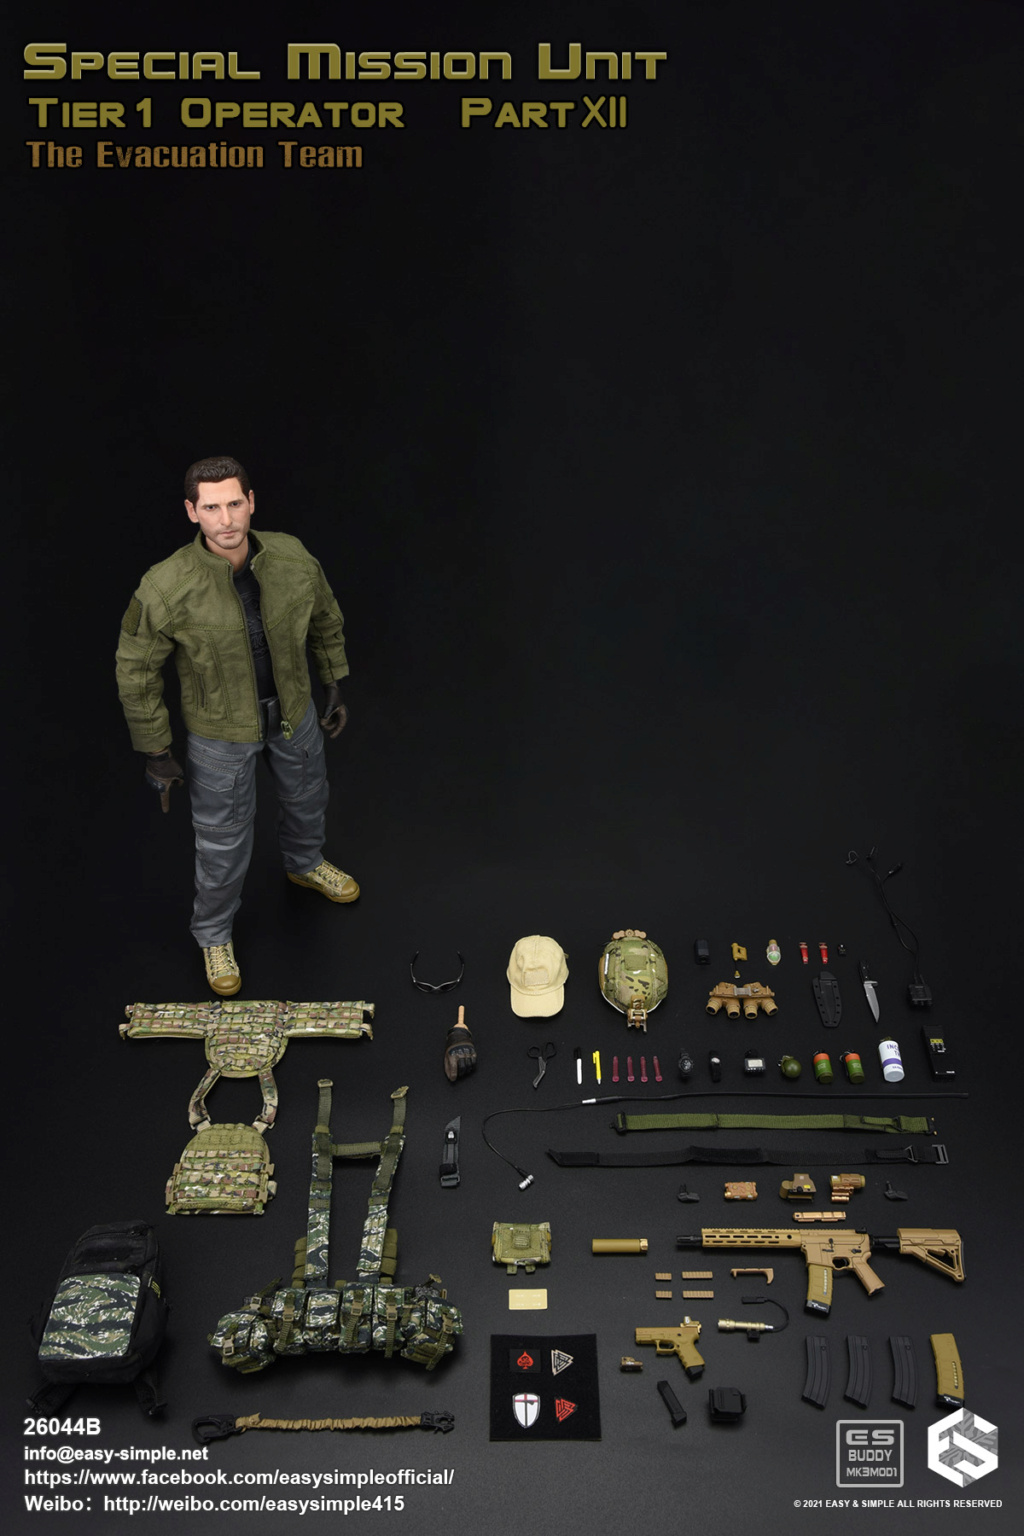 EvacuationTeam - NEW PRODUCT: Easy&Simple: 26044B Special Mission Unit Tier1 Operator Part XII The Evacuation Team 83ca3110